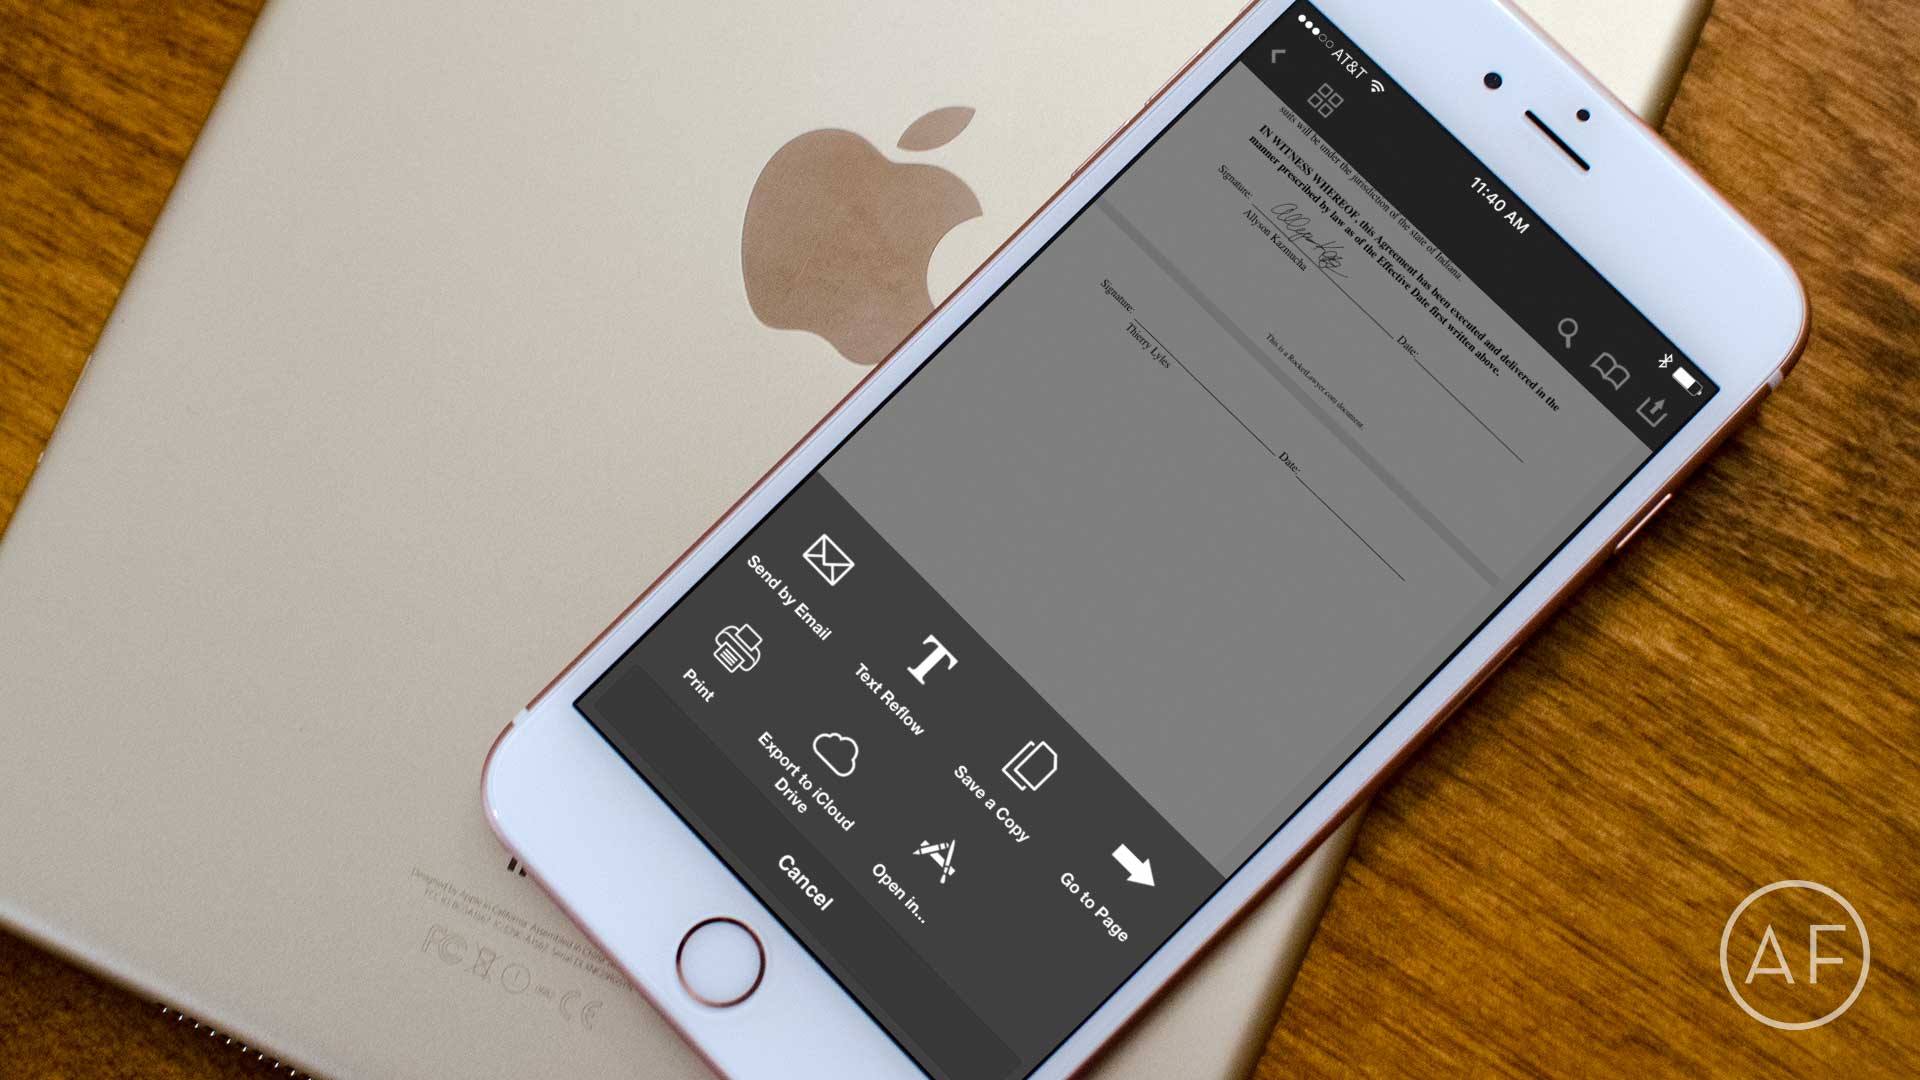 Want to go completely paperless? Here's how to better manage PDF documents on iPhone and iPad!